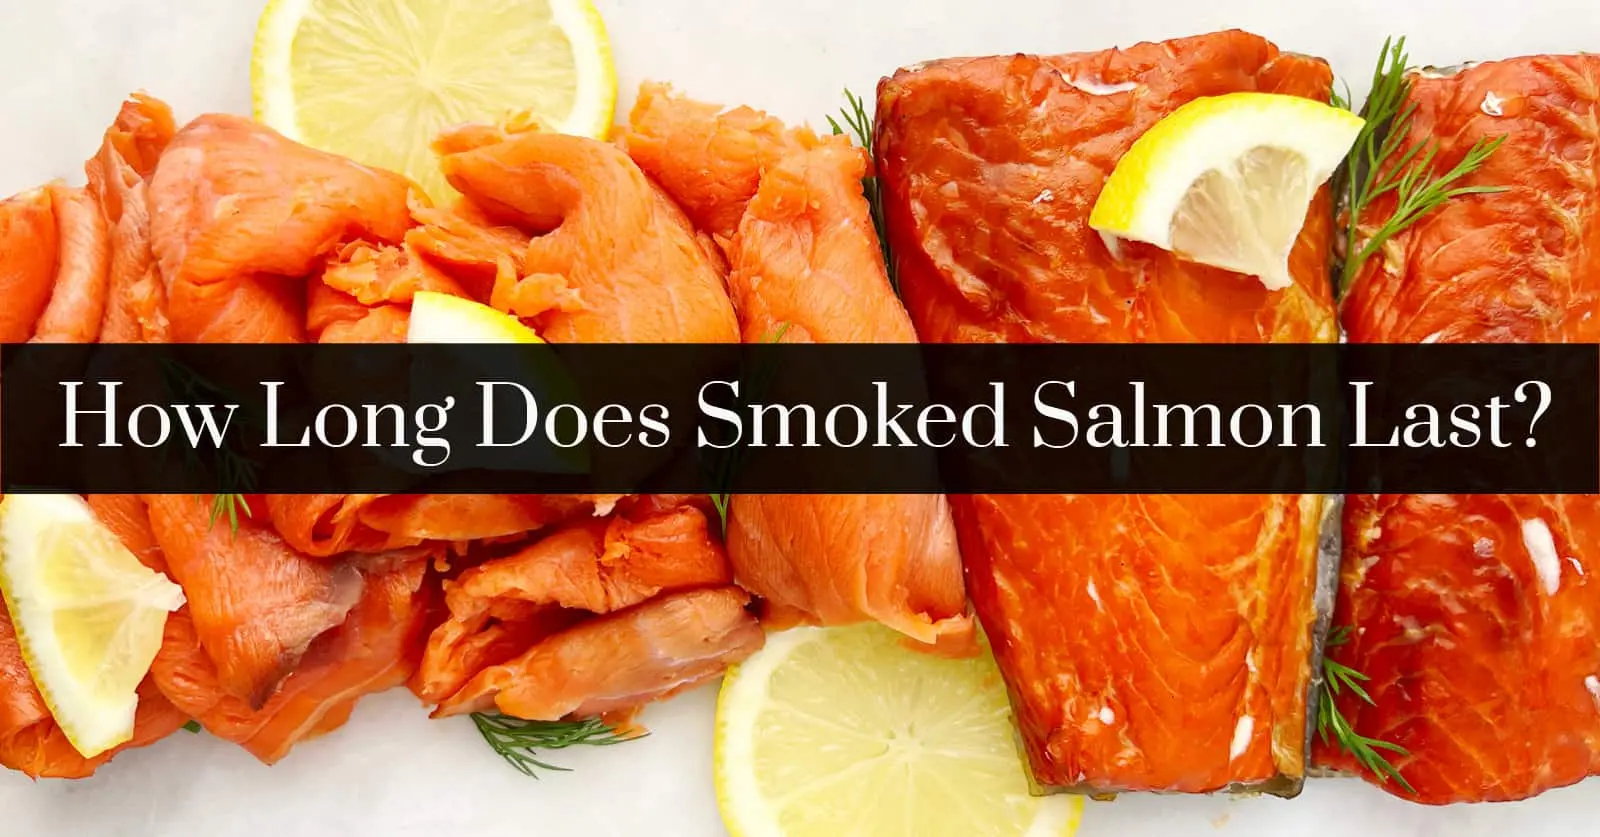 how long does smoked salmon last - How can you tell if smoked salmon has gone bad